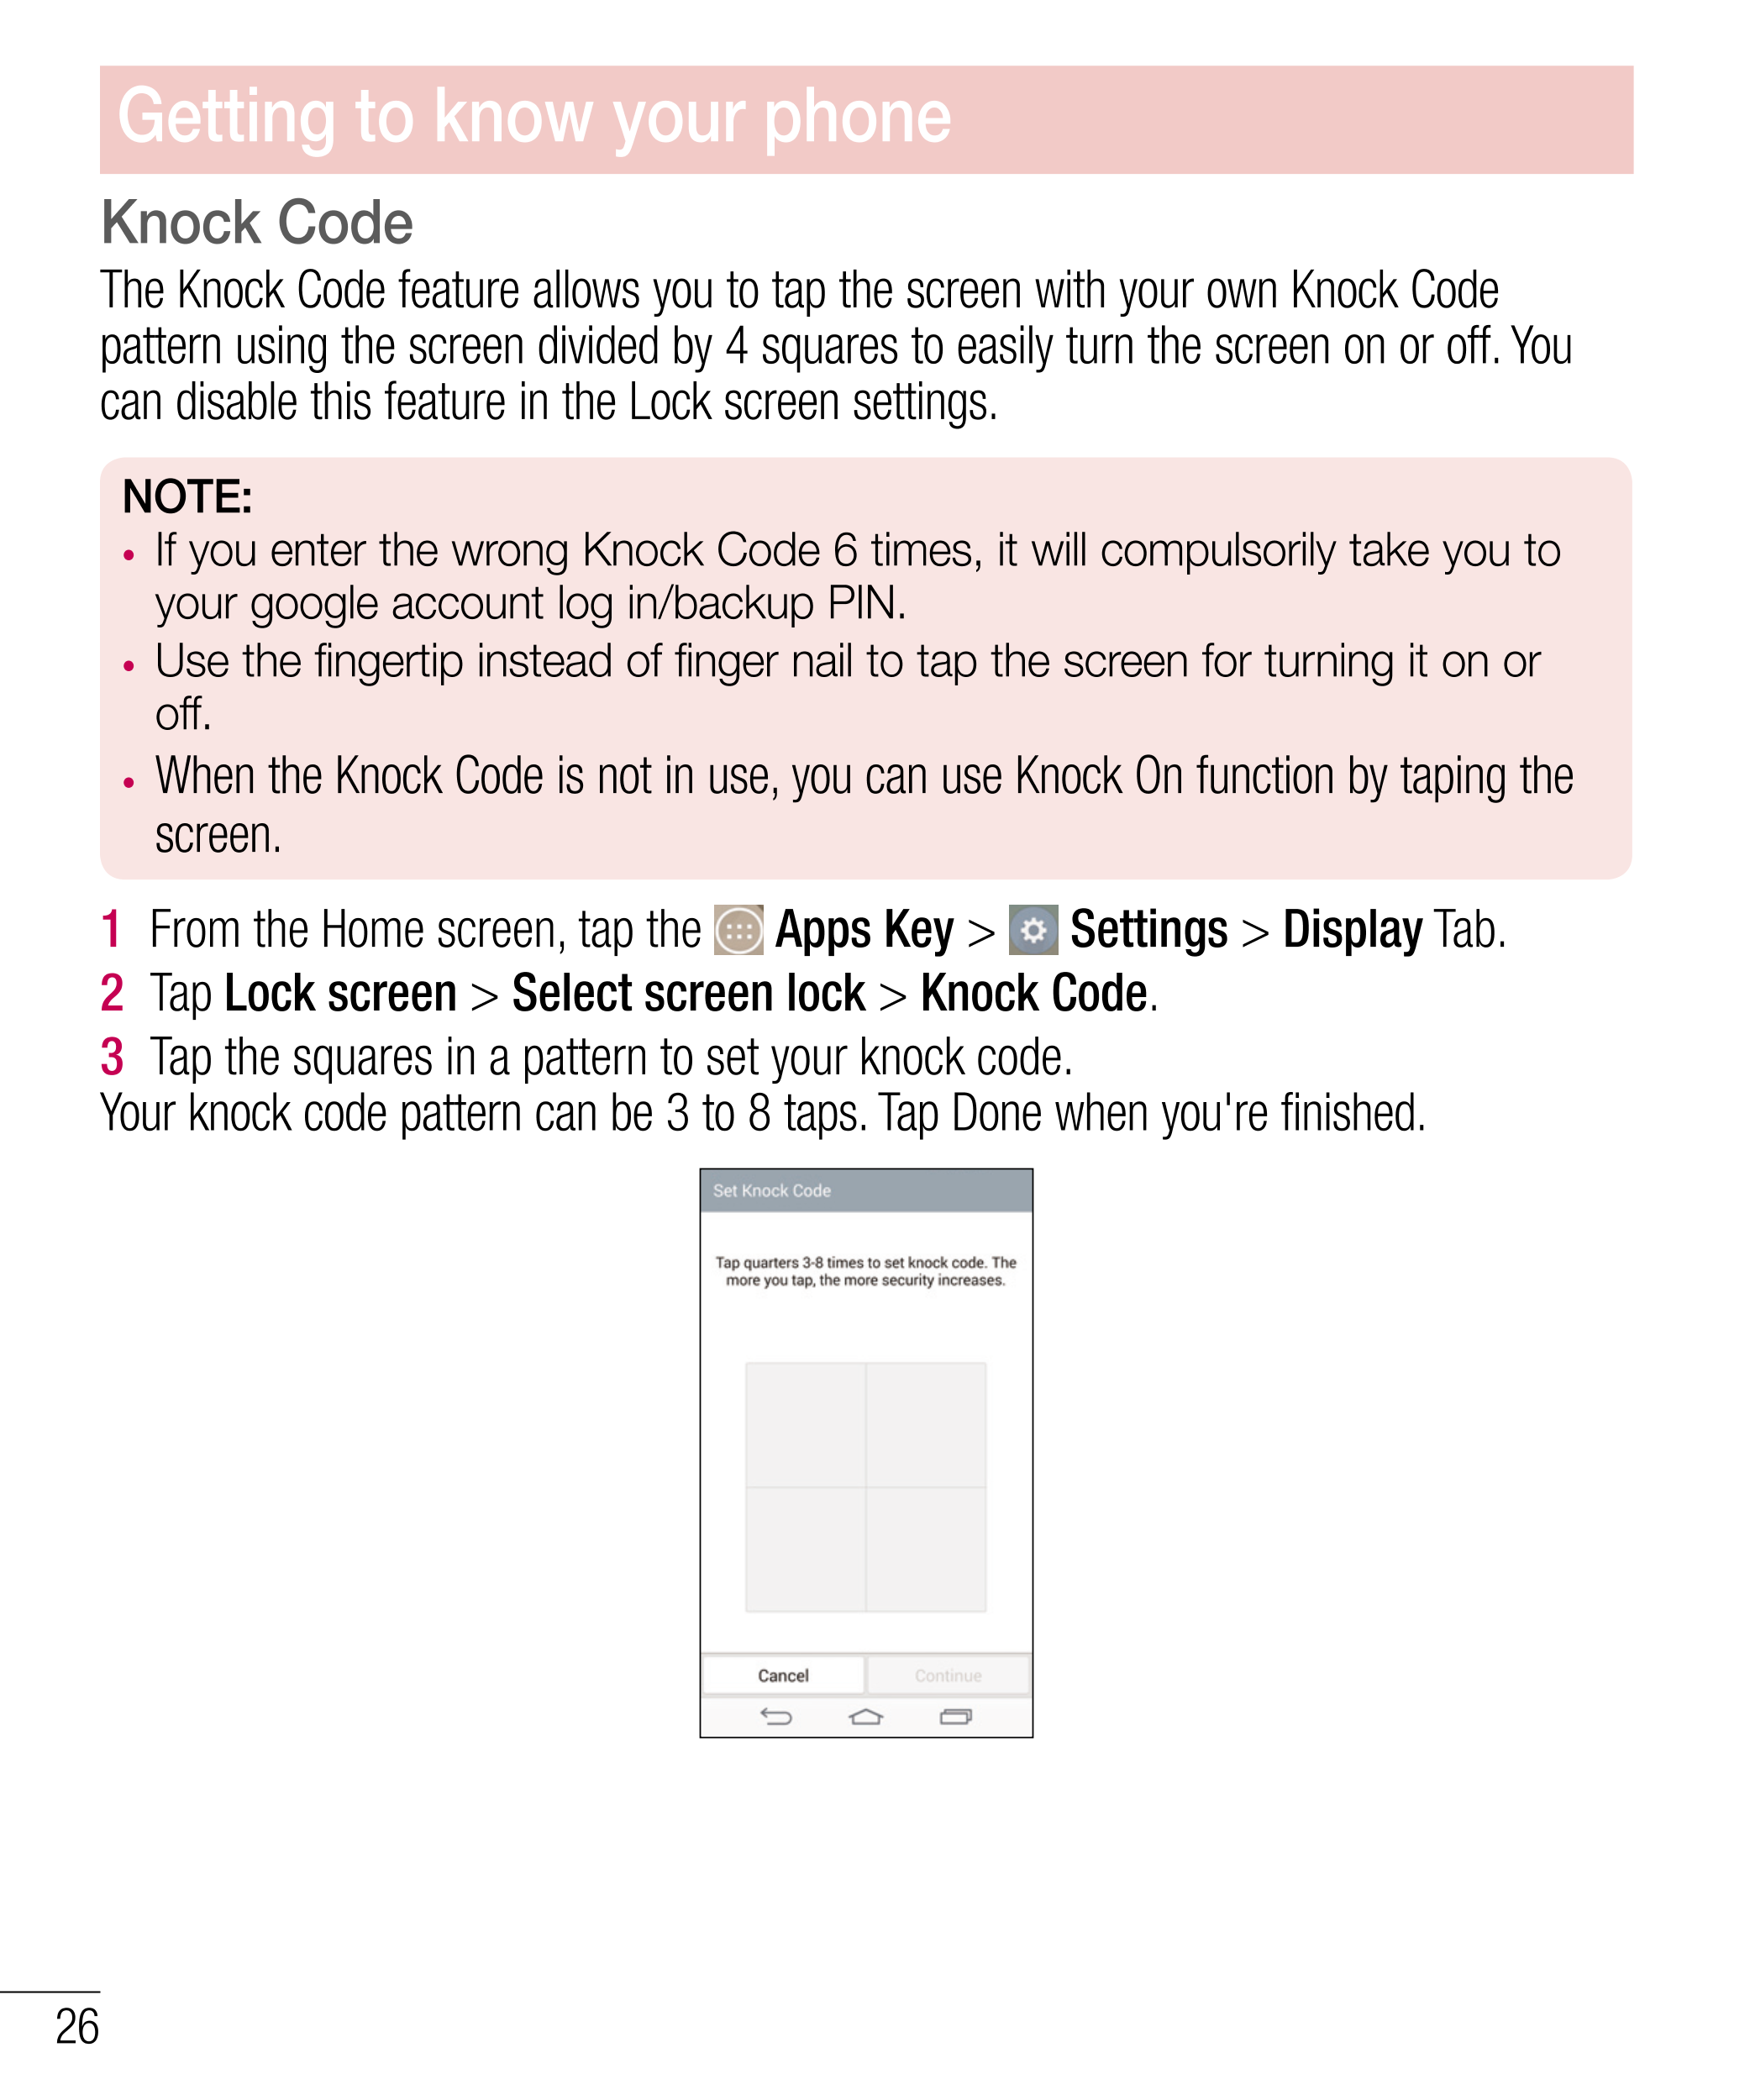 Getting to know your phone
Knock Code
The Knock Code feature allows you to tap the screen with your own Knock Code 
pattern usin